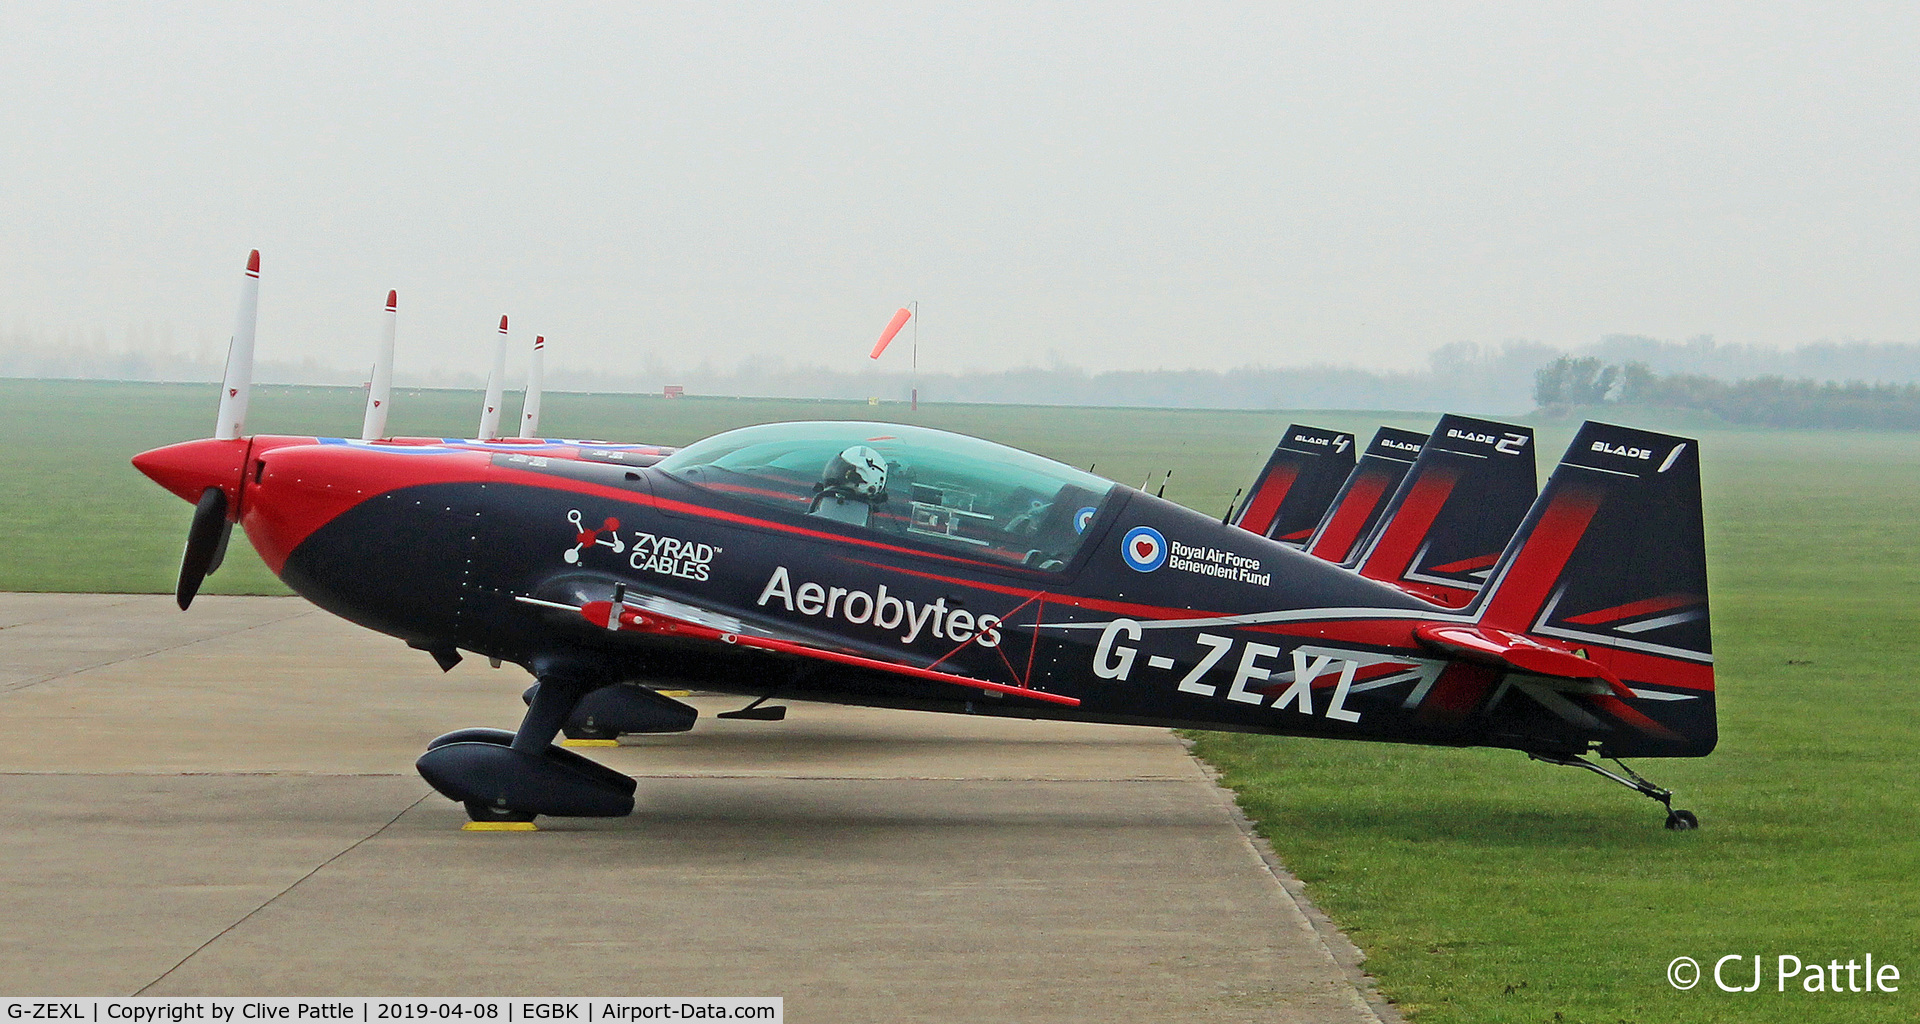 G-ZEXL, 2006 Extra EA-300L C/N 1225, Parked @ Sywell along with other members of 'The Blades' Aerobatic Team.